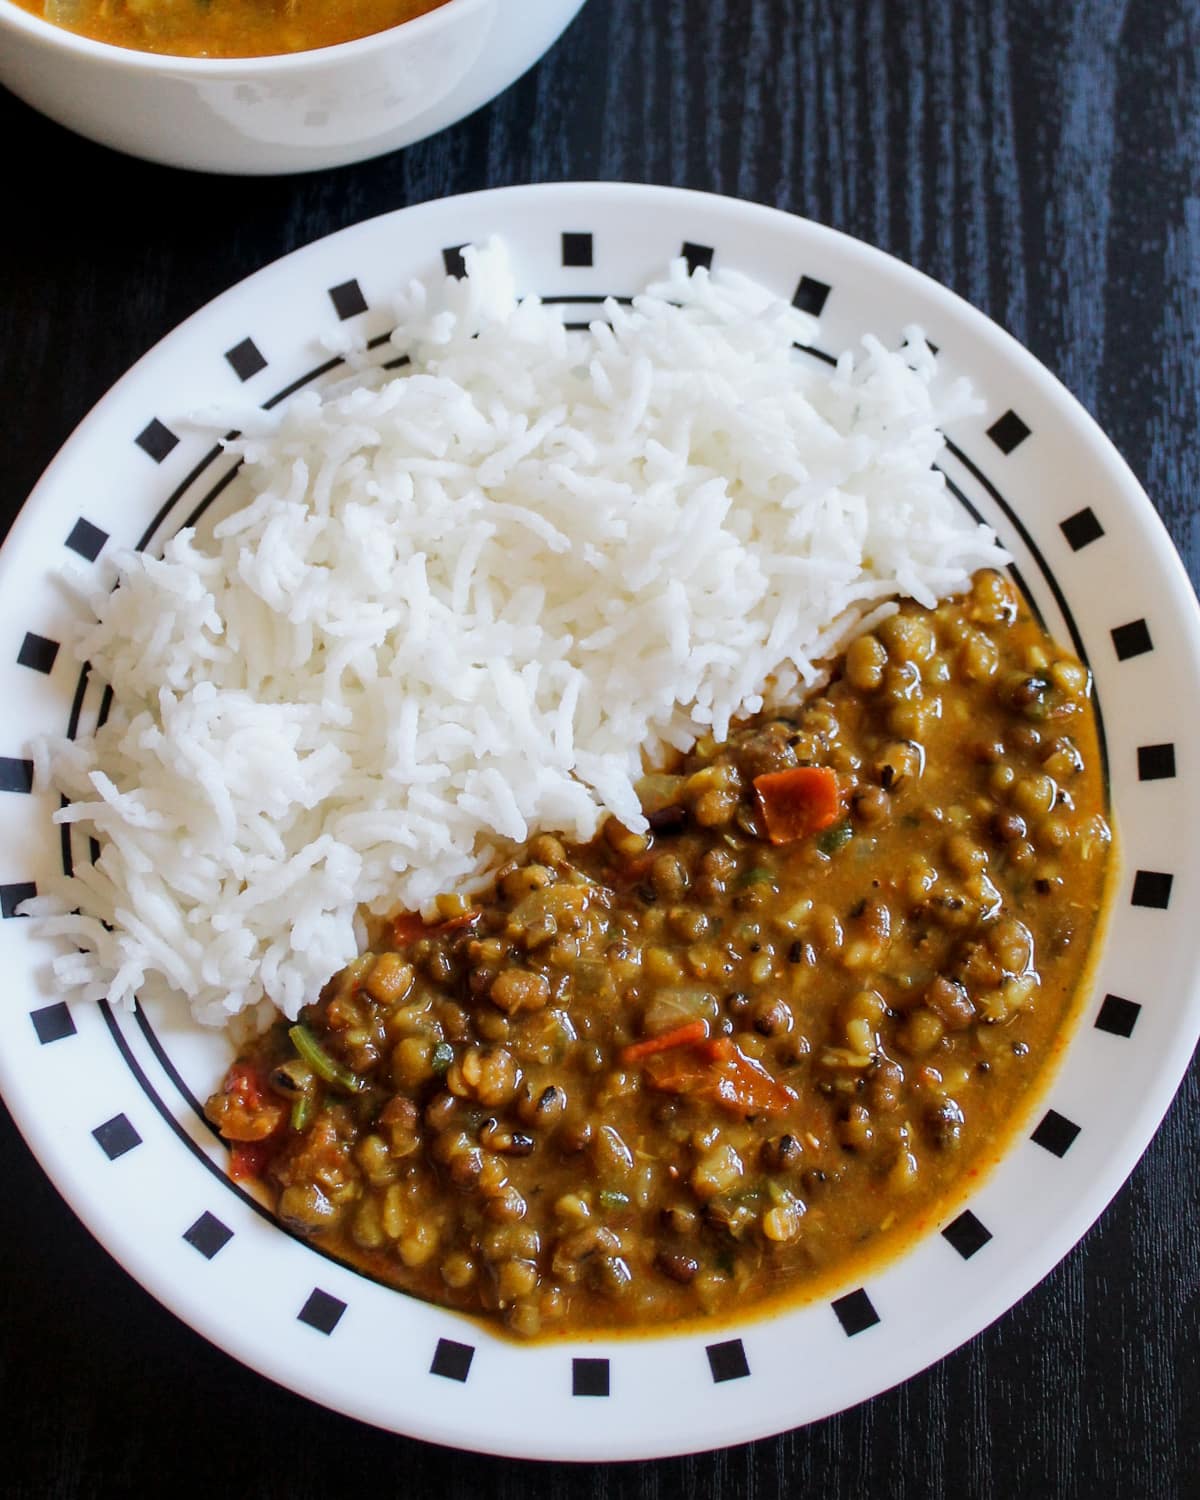 Green moong dal and plain rice served in a plate.